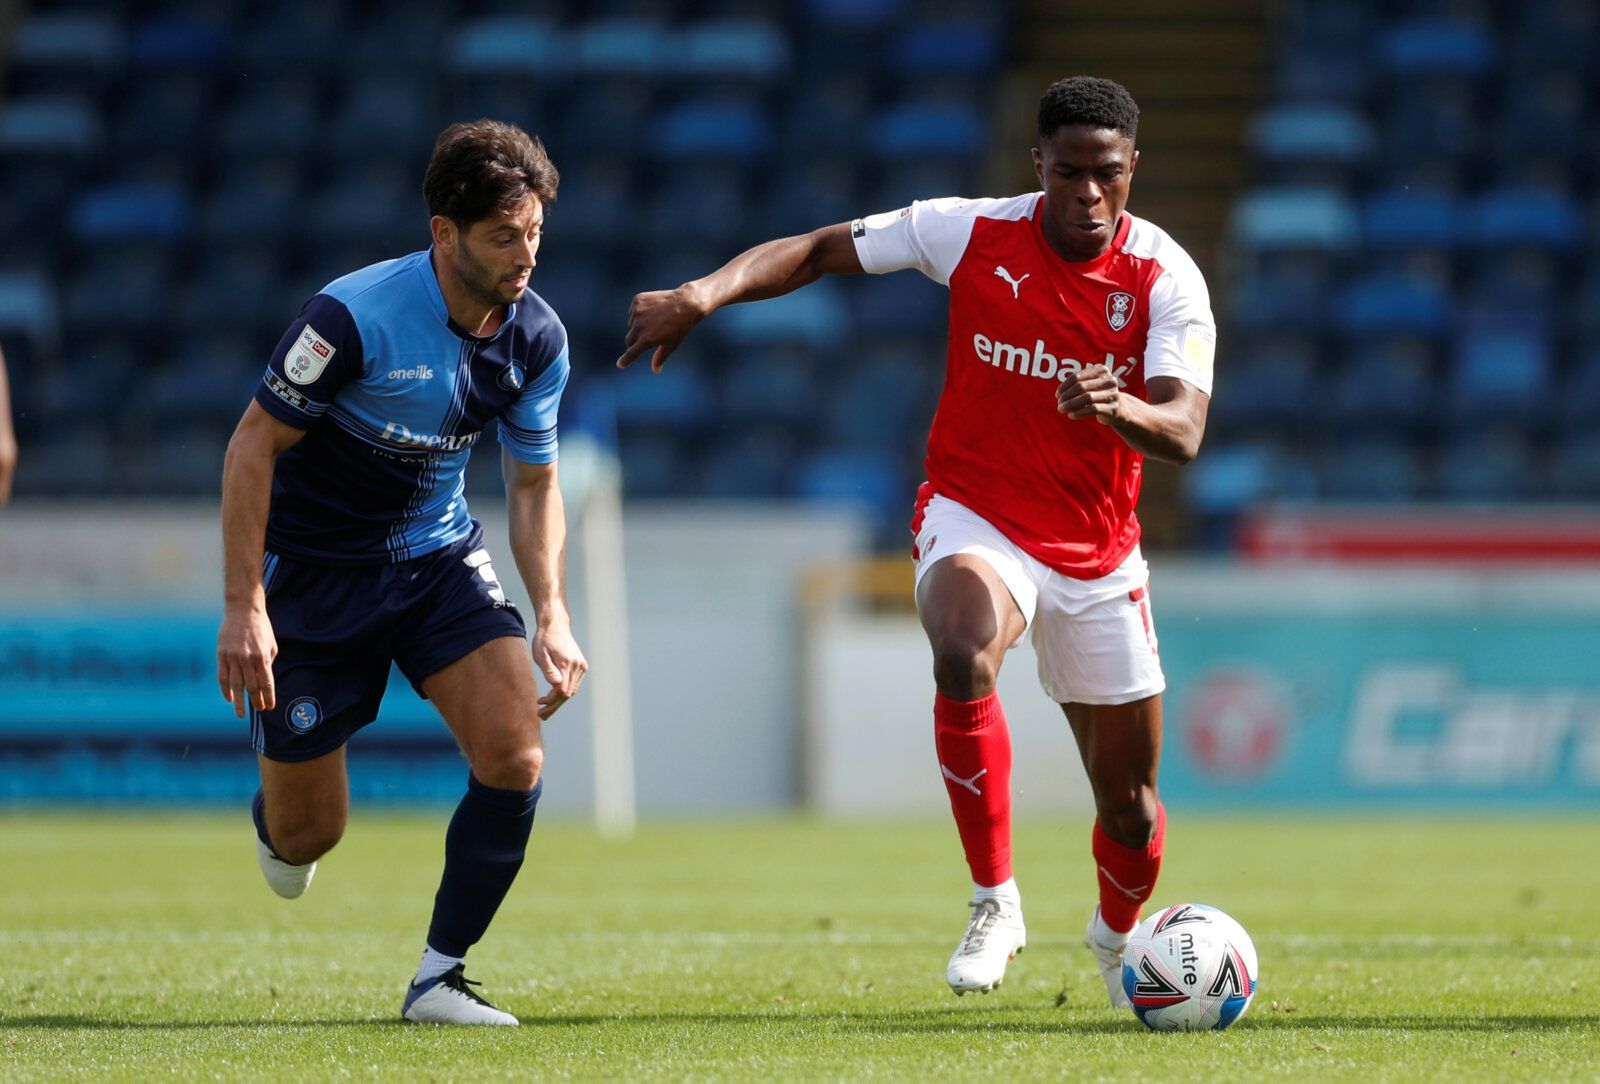 Soccer Football - Championship - Wycombe Wanderers v Rotherham United - Adams Park, High Wycombe, Britain - September 12, 2020 Wycombe WanderersÕ Joe Jacobson in action with Rotherham UnitedÕs Chiedozie Ogbene  Action Images/Matthew Childs  EDITORIAL USE ONLY. No use with unauthorized audio, video, data, fixture lists, club/league logos or 